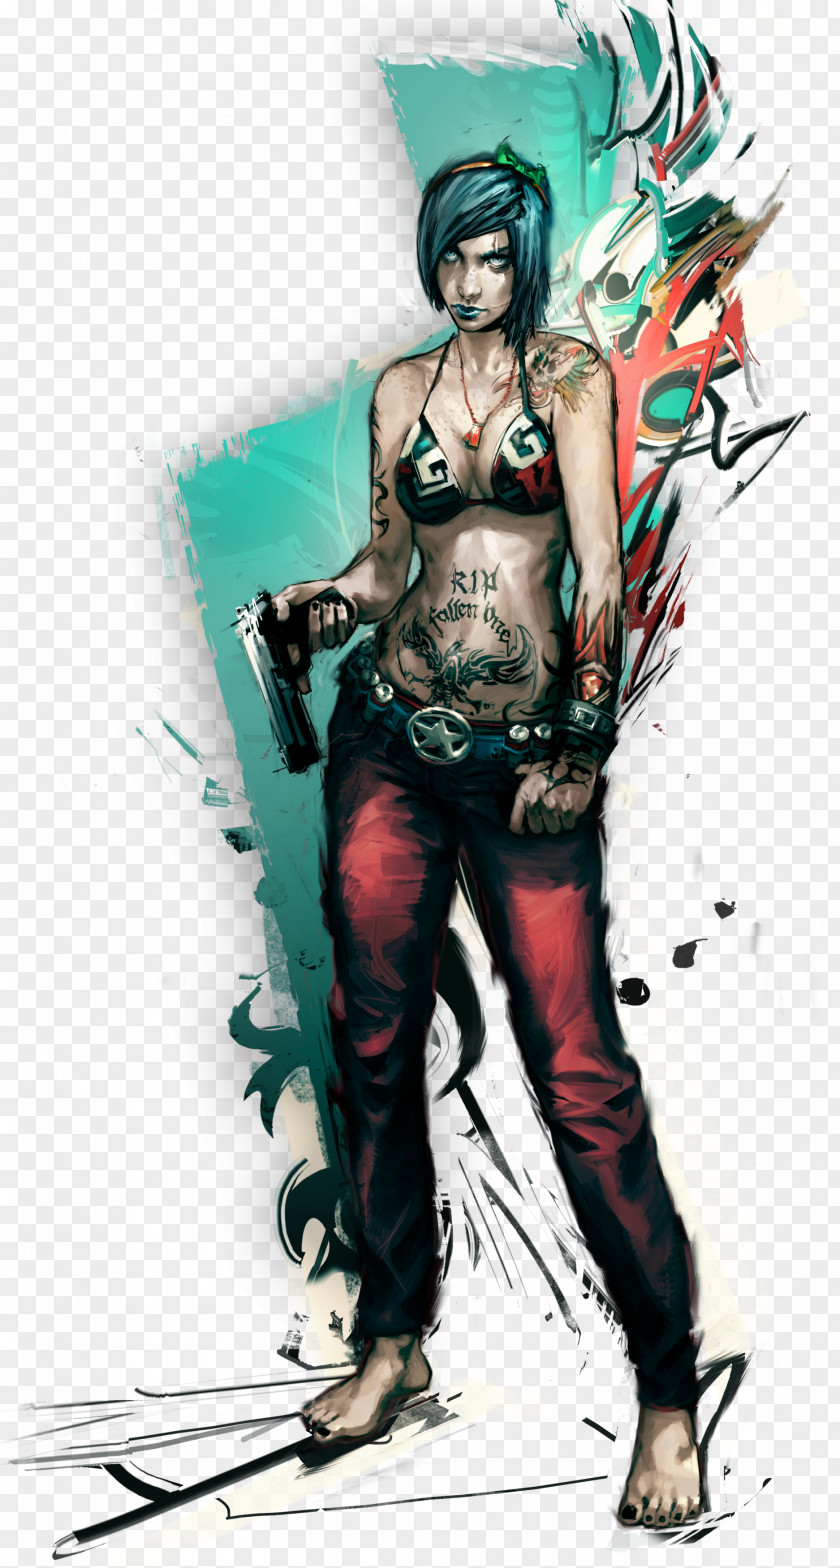 Painting APB: All Points Bulletin Work Of Art Video Game Concept PNG